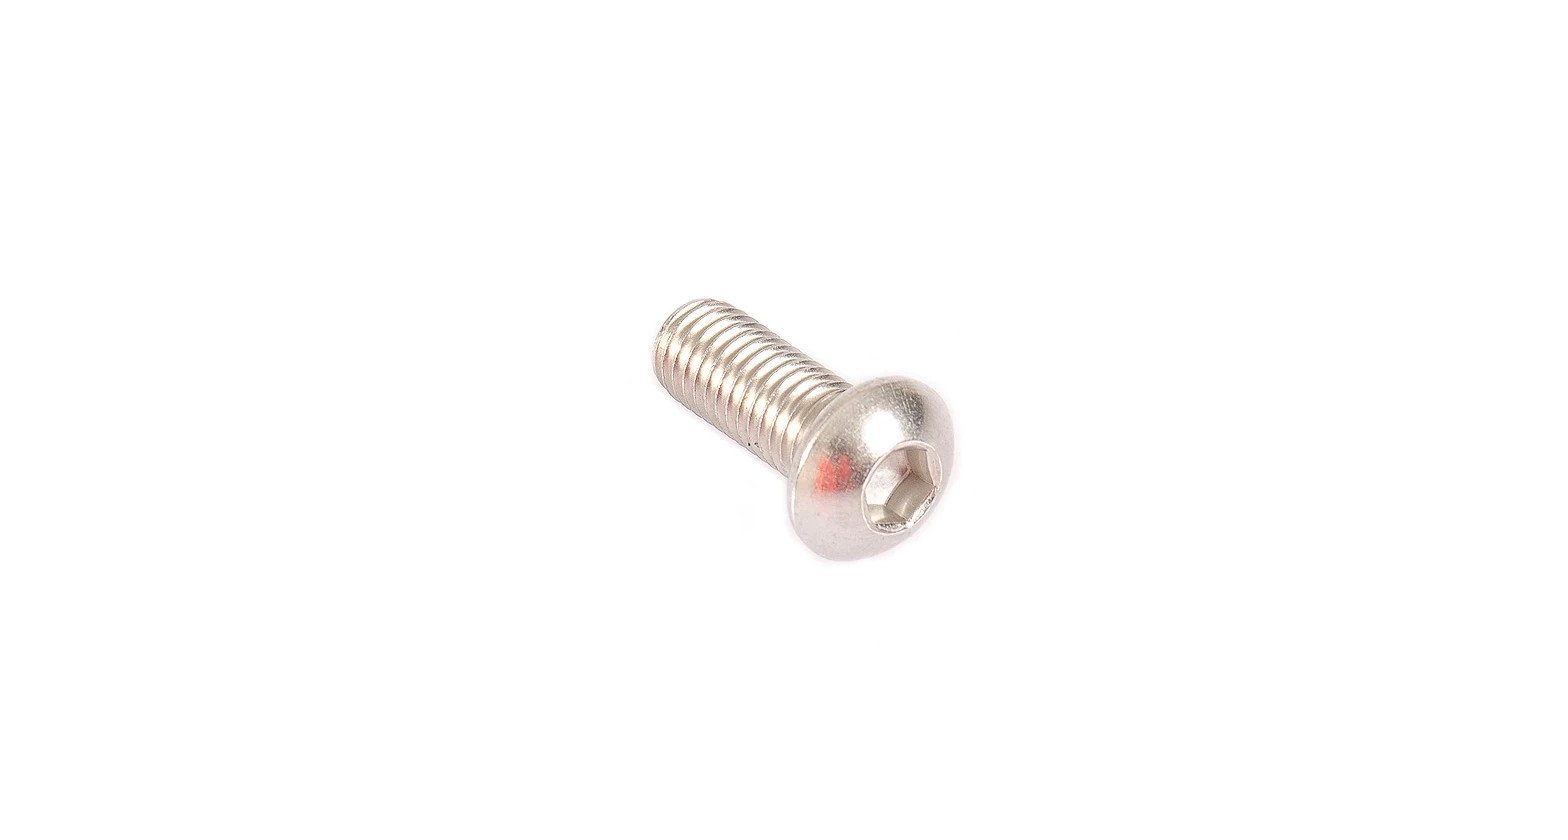 M8 X 20mm Button Head Cap Screw (Stainless Steel) (4 Pack)